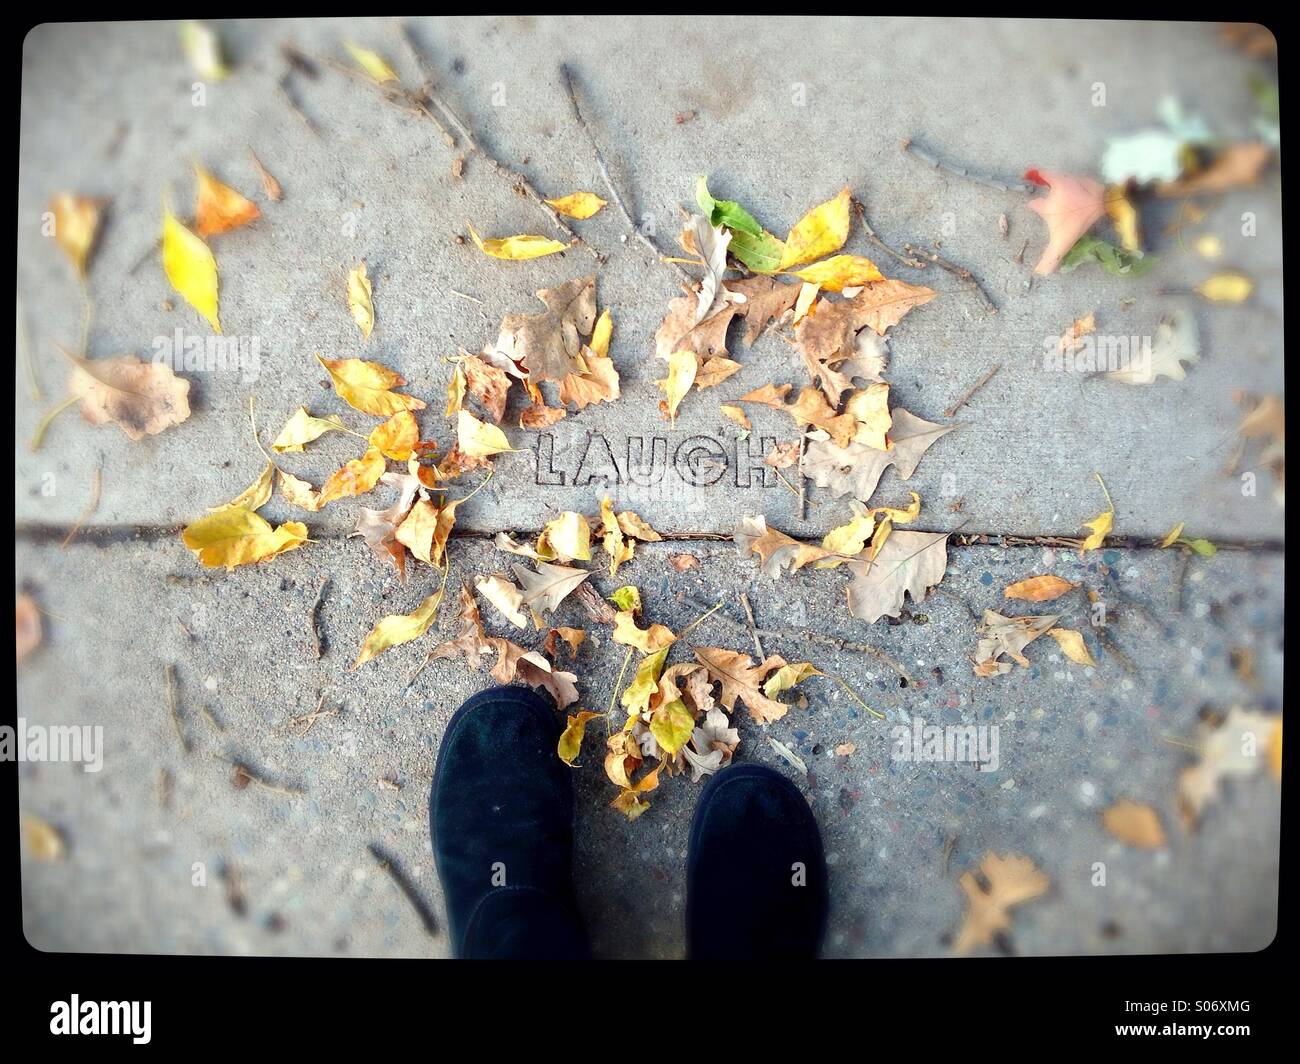 A person's feet standing next to the word 'laugh' carved into a sidewalk. Stock Photo